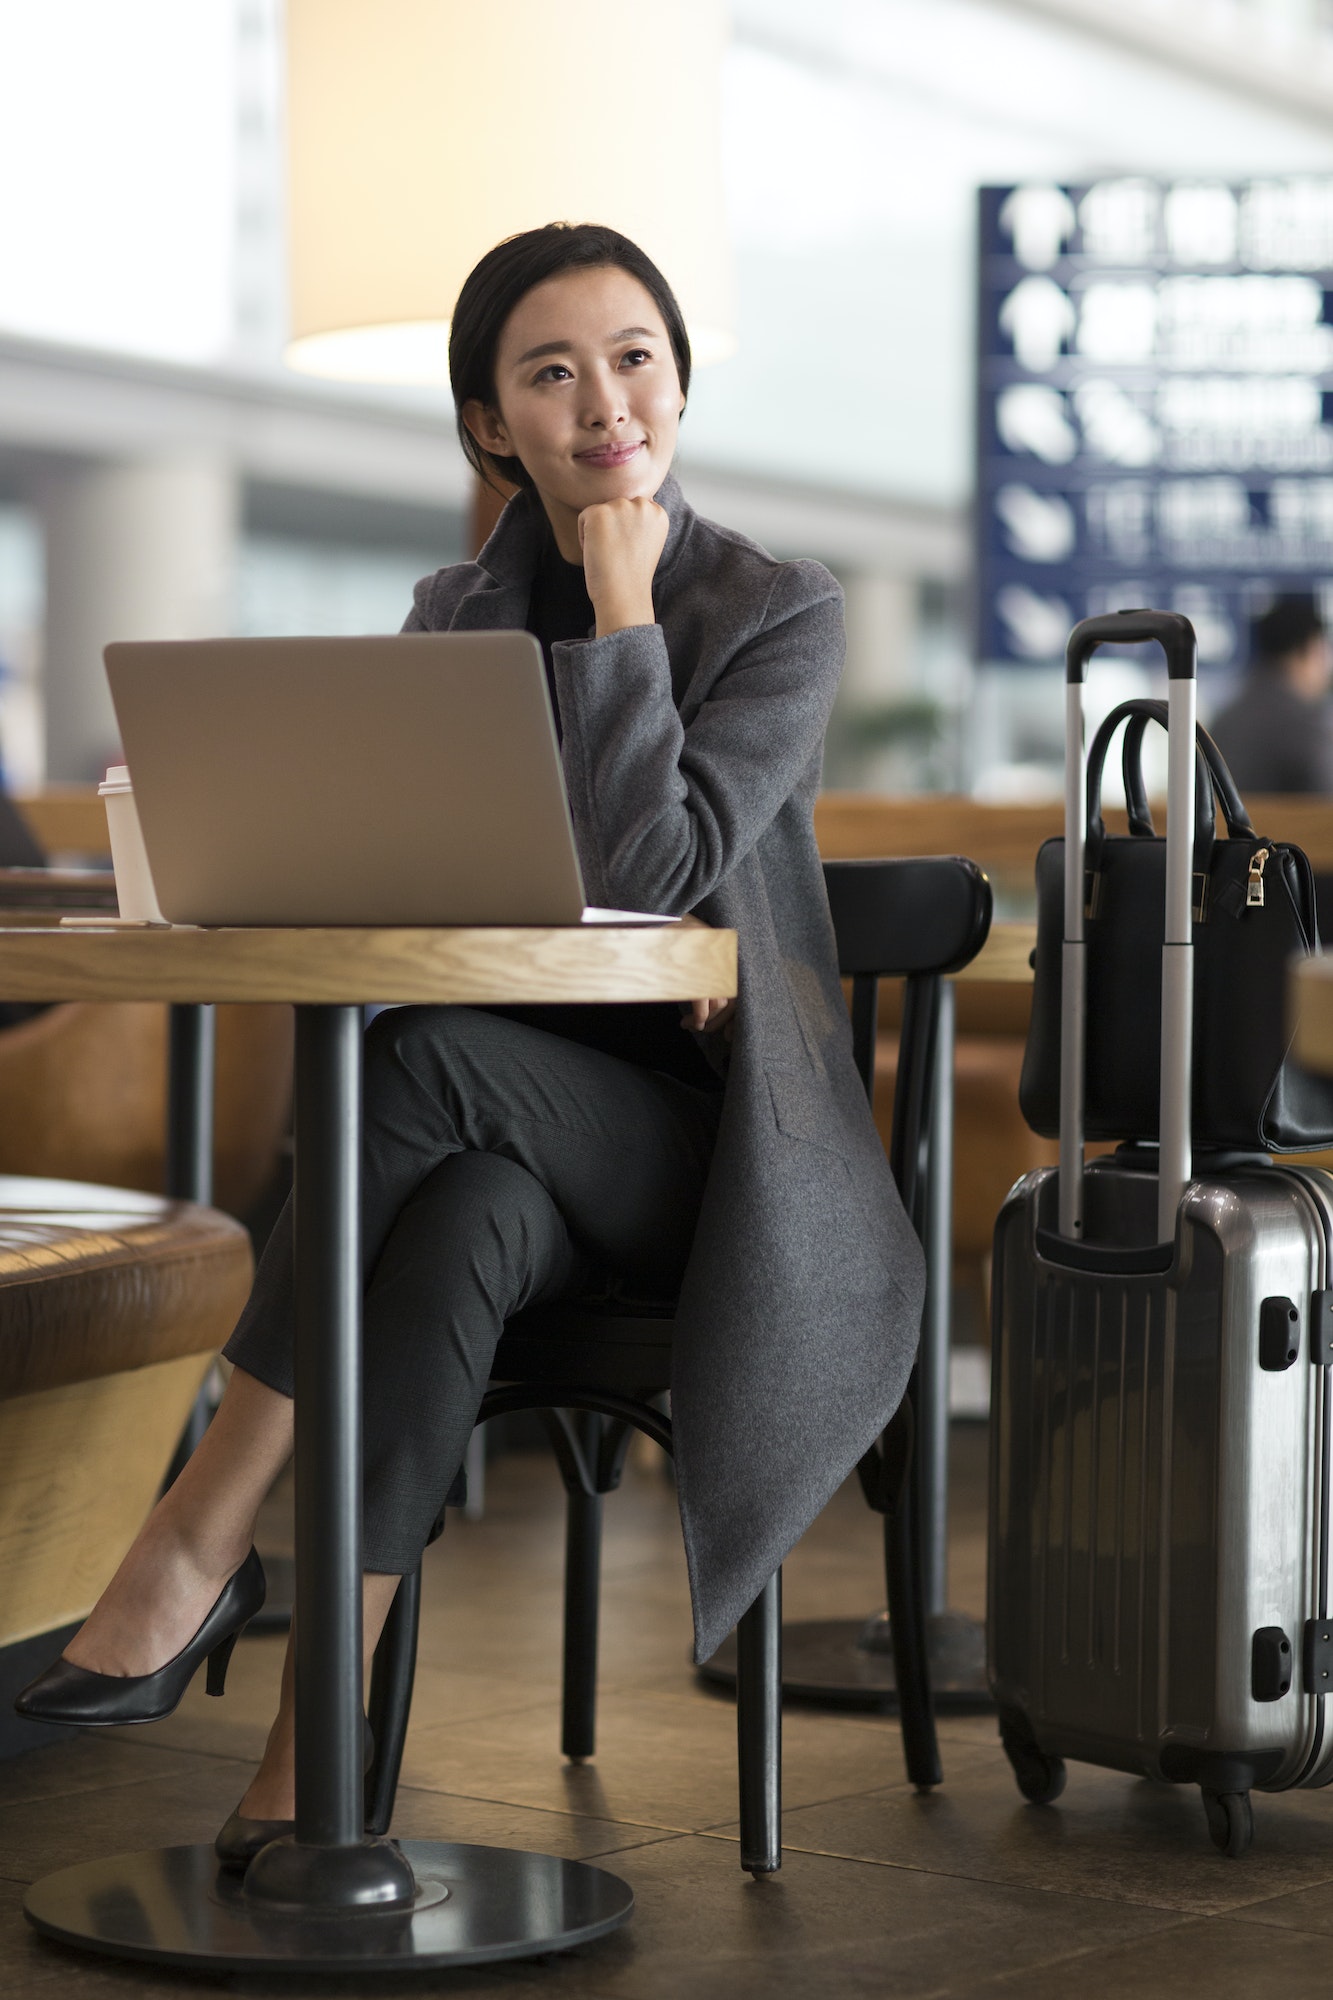 Businesswoman waiting in airport